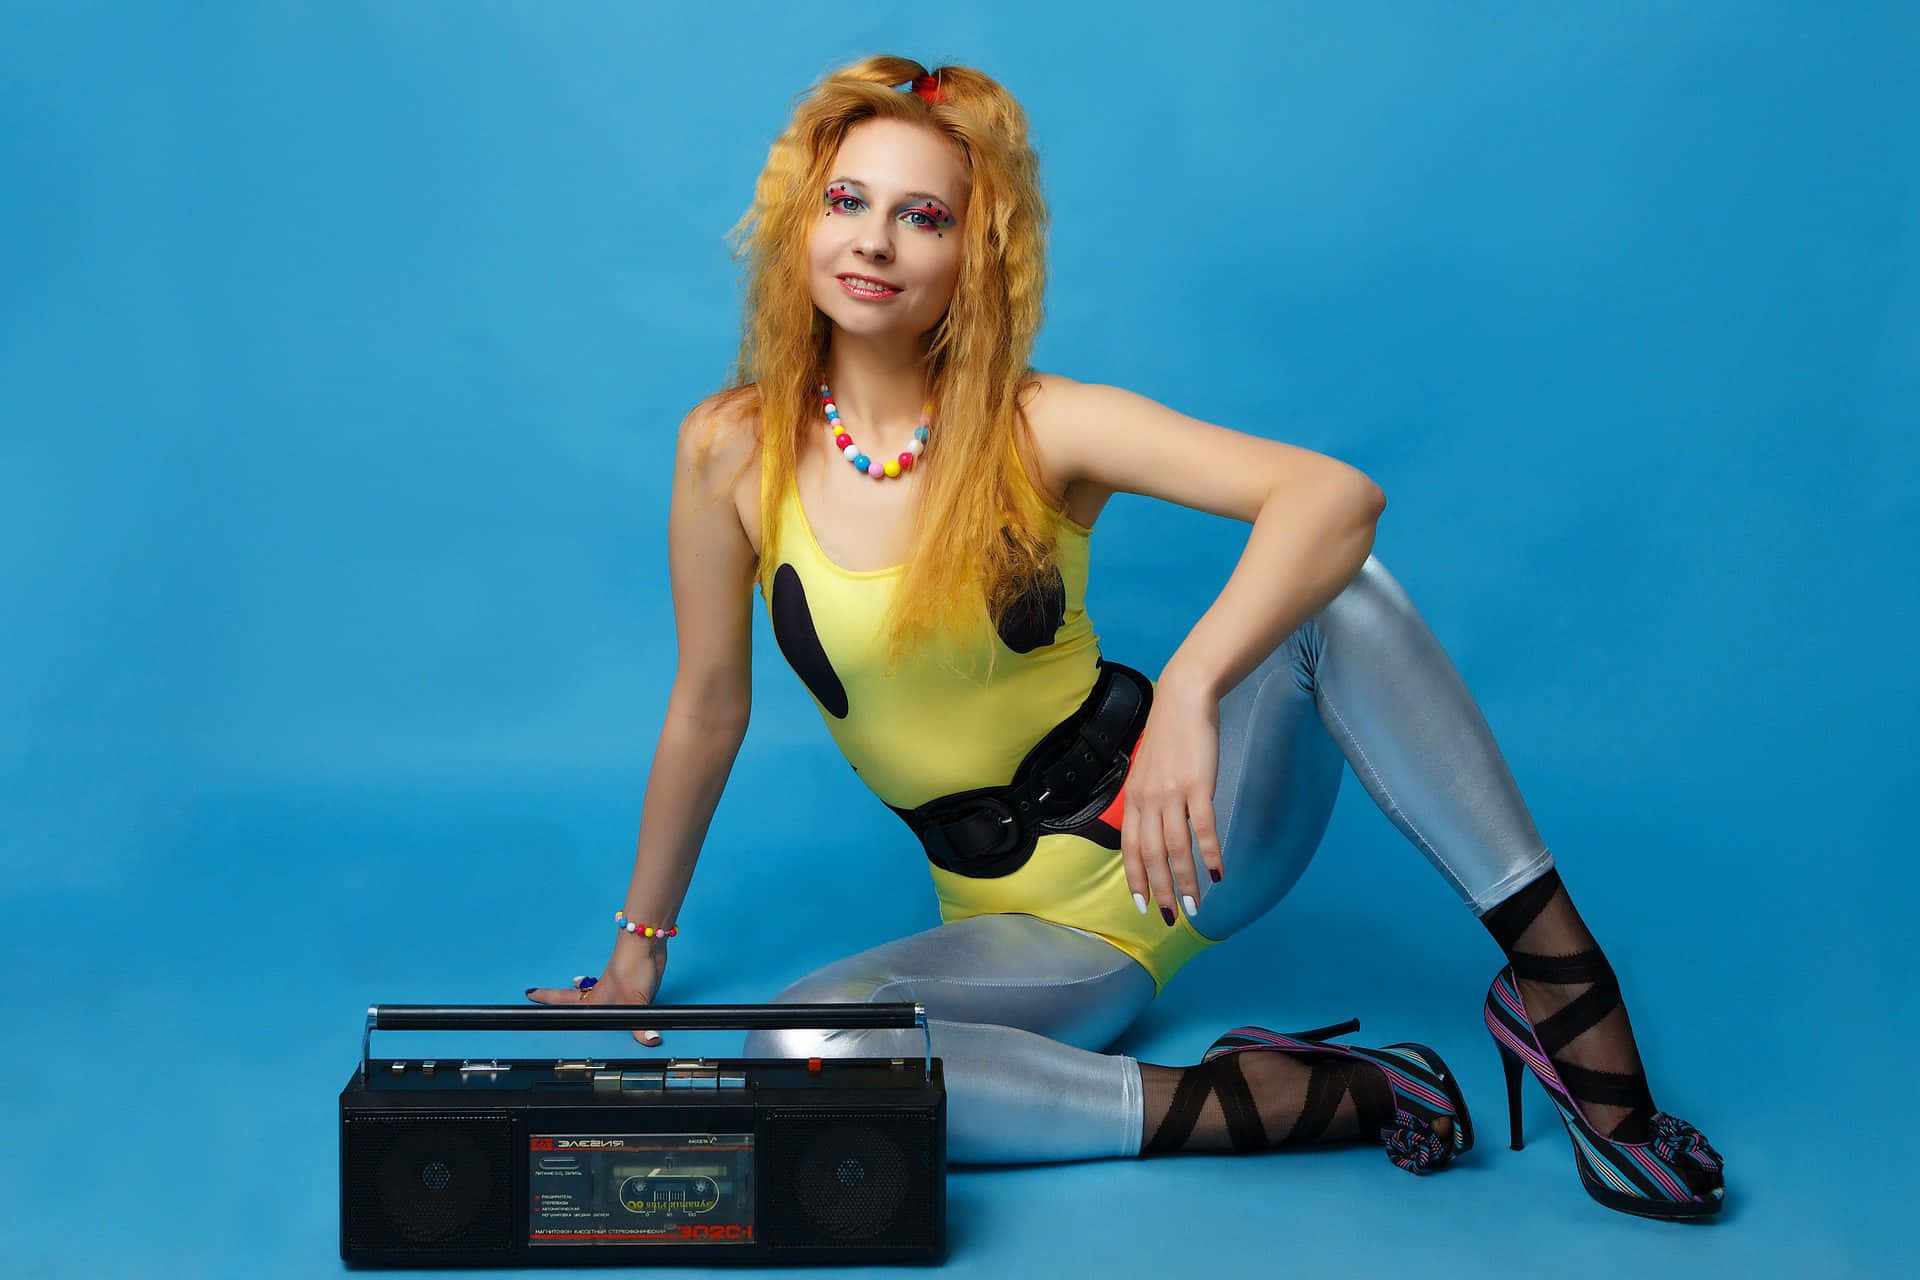 A Woman In A Metallic Outfit Sitting On A Blue Background With A Boombox